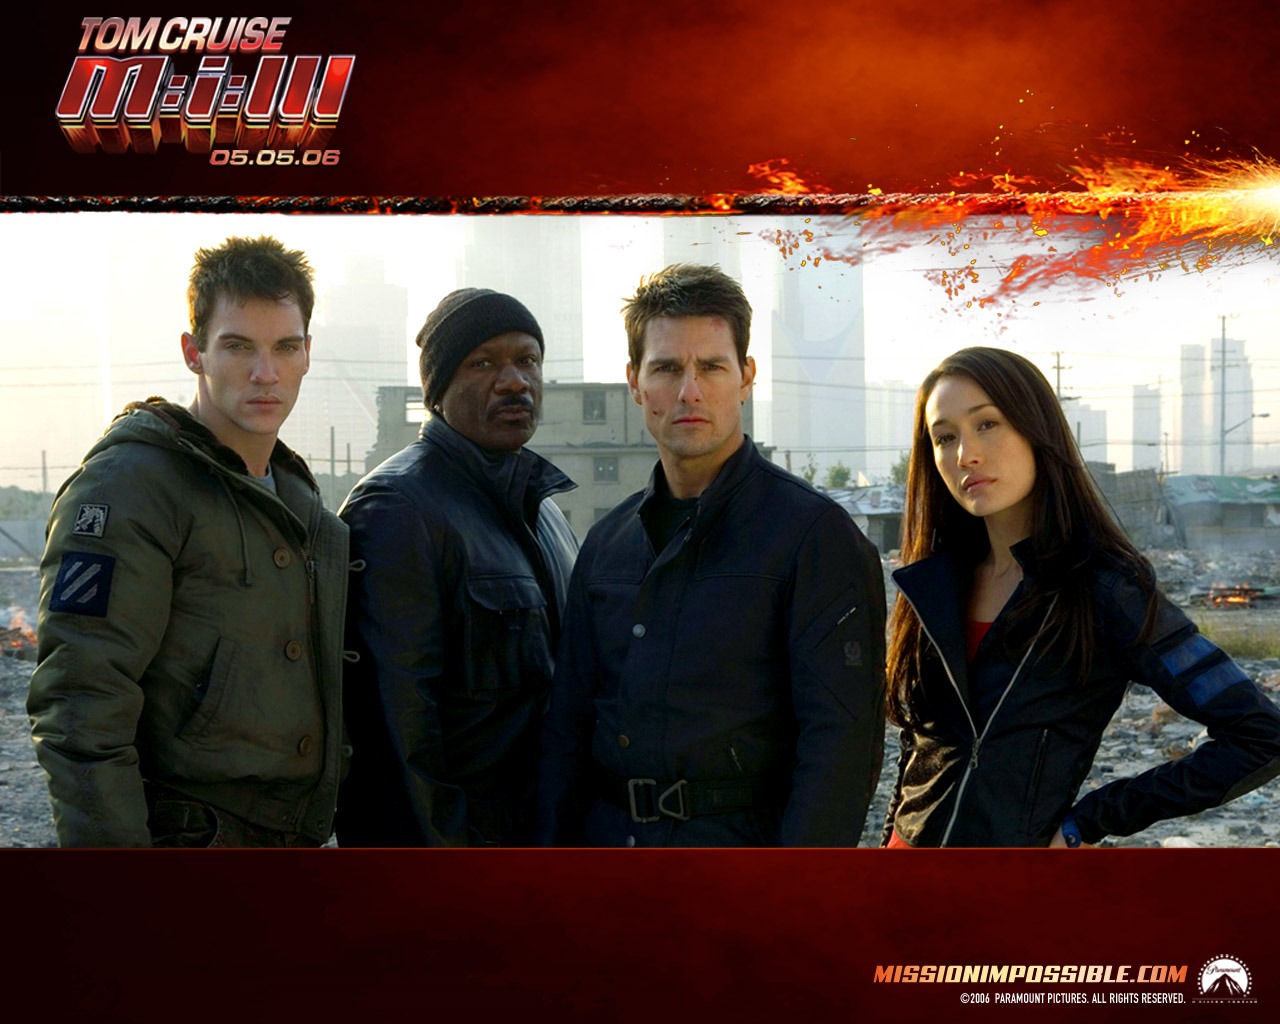 Mission Impossible 3 Wallpaper #14 - 1280x1024